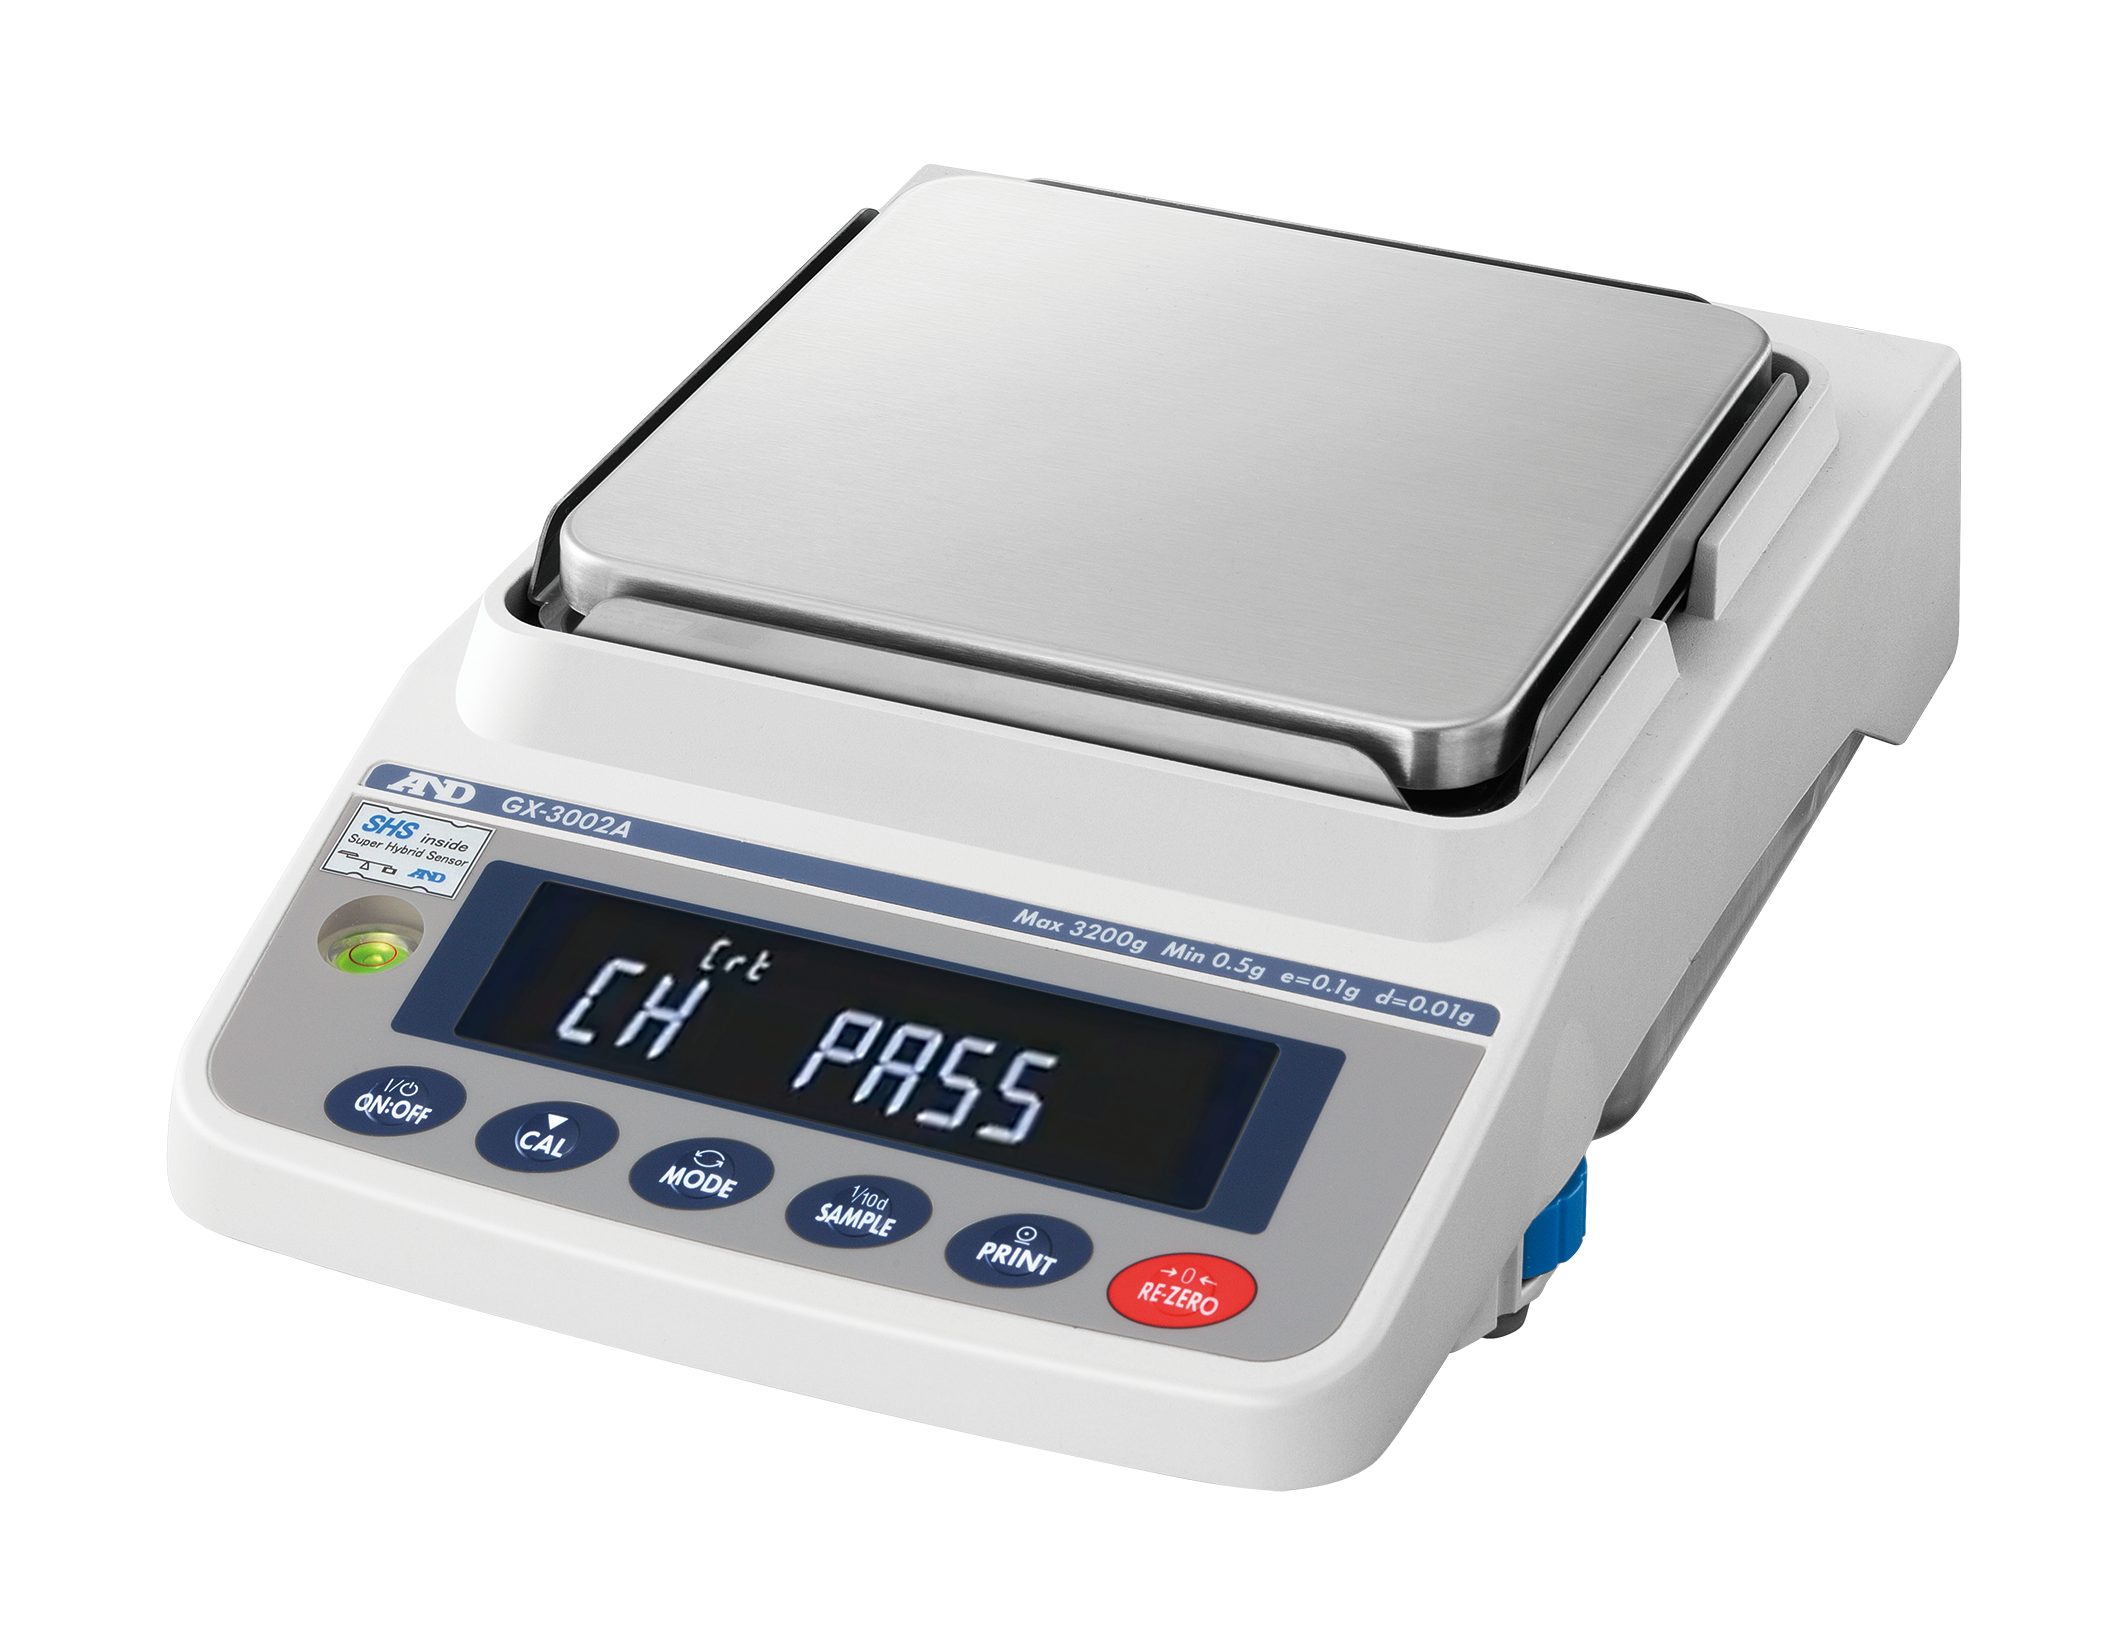 A&D Weighing Apollo GX-3002A Precision Balance, 3200g x 0.01g with Internal Calibration with Warranty